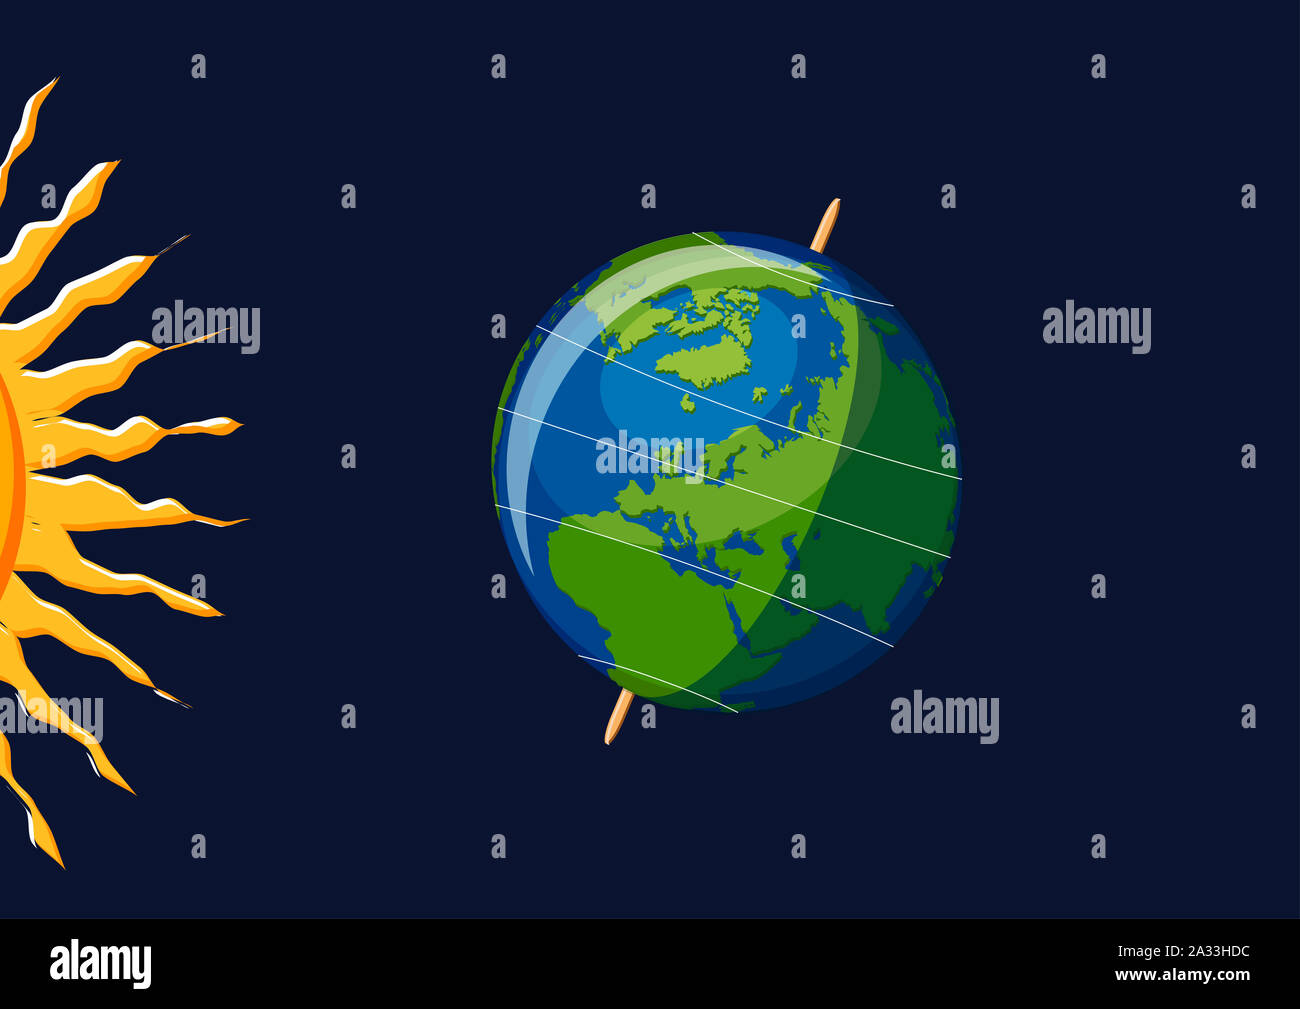 Earth climate zones, illustration Stock Photo